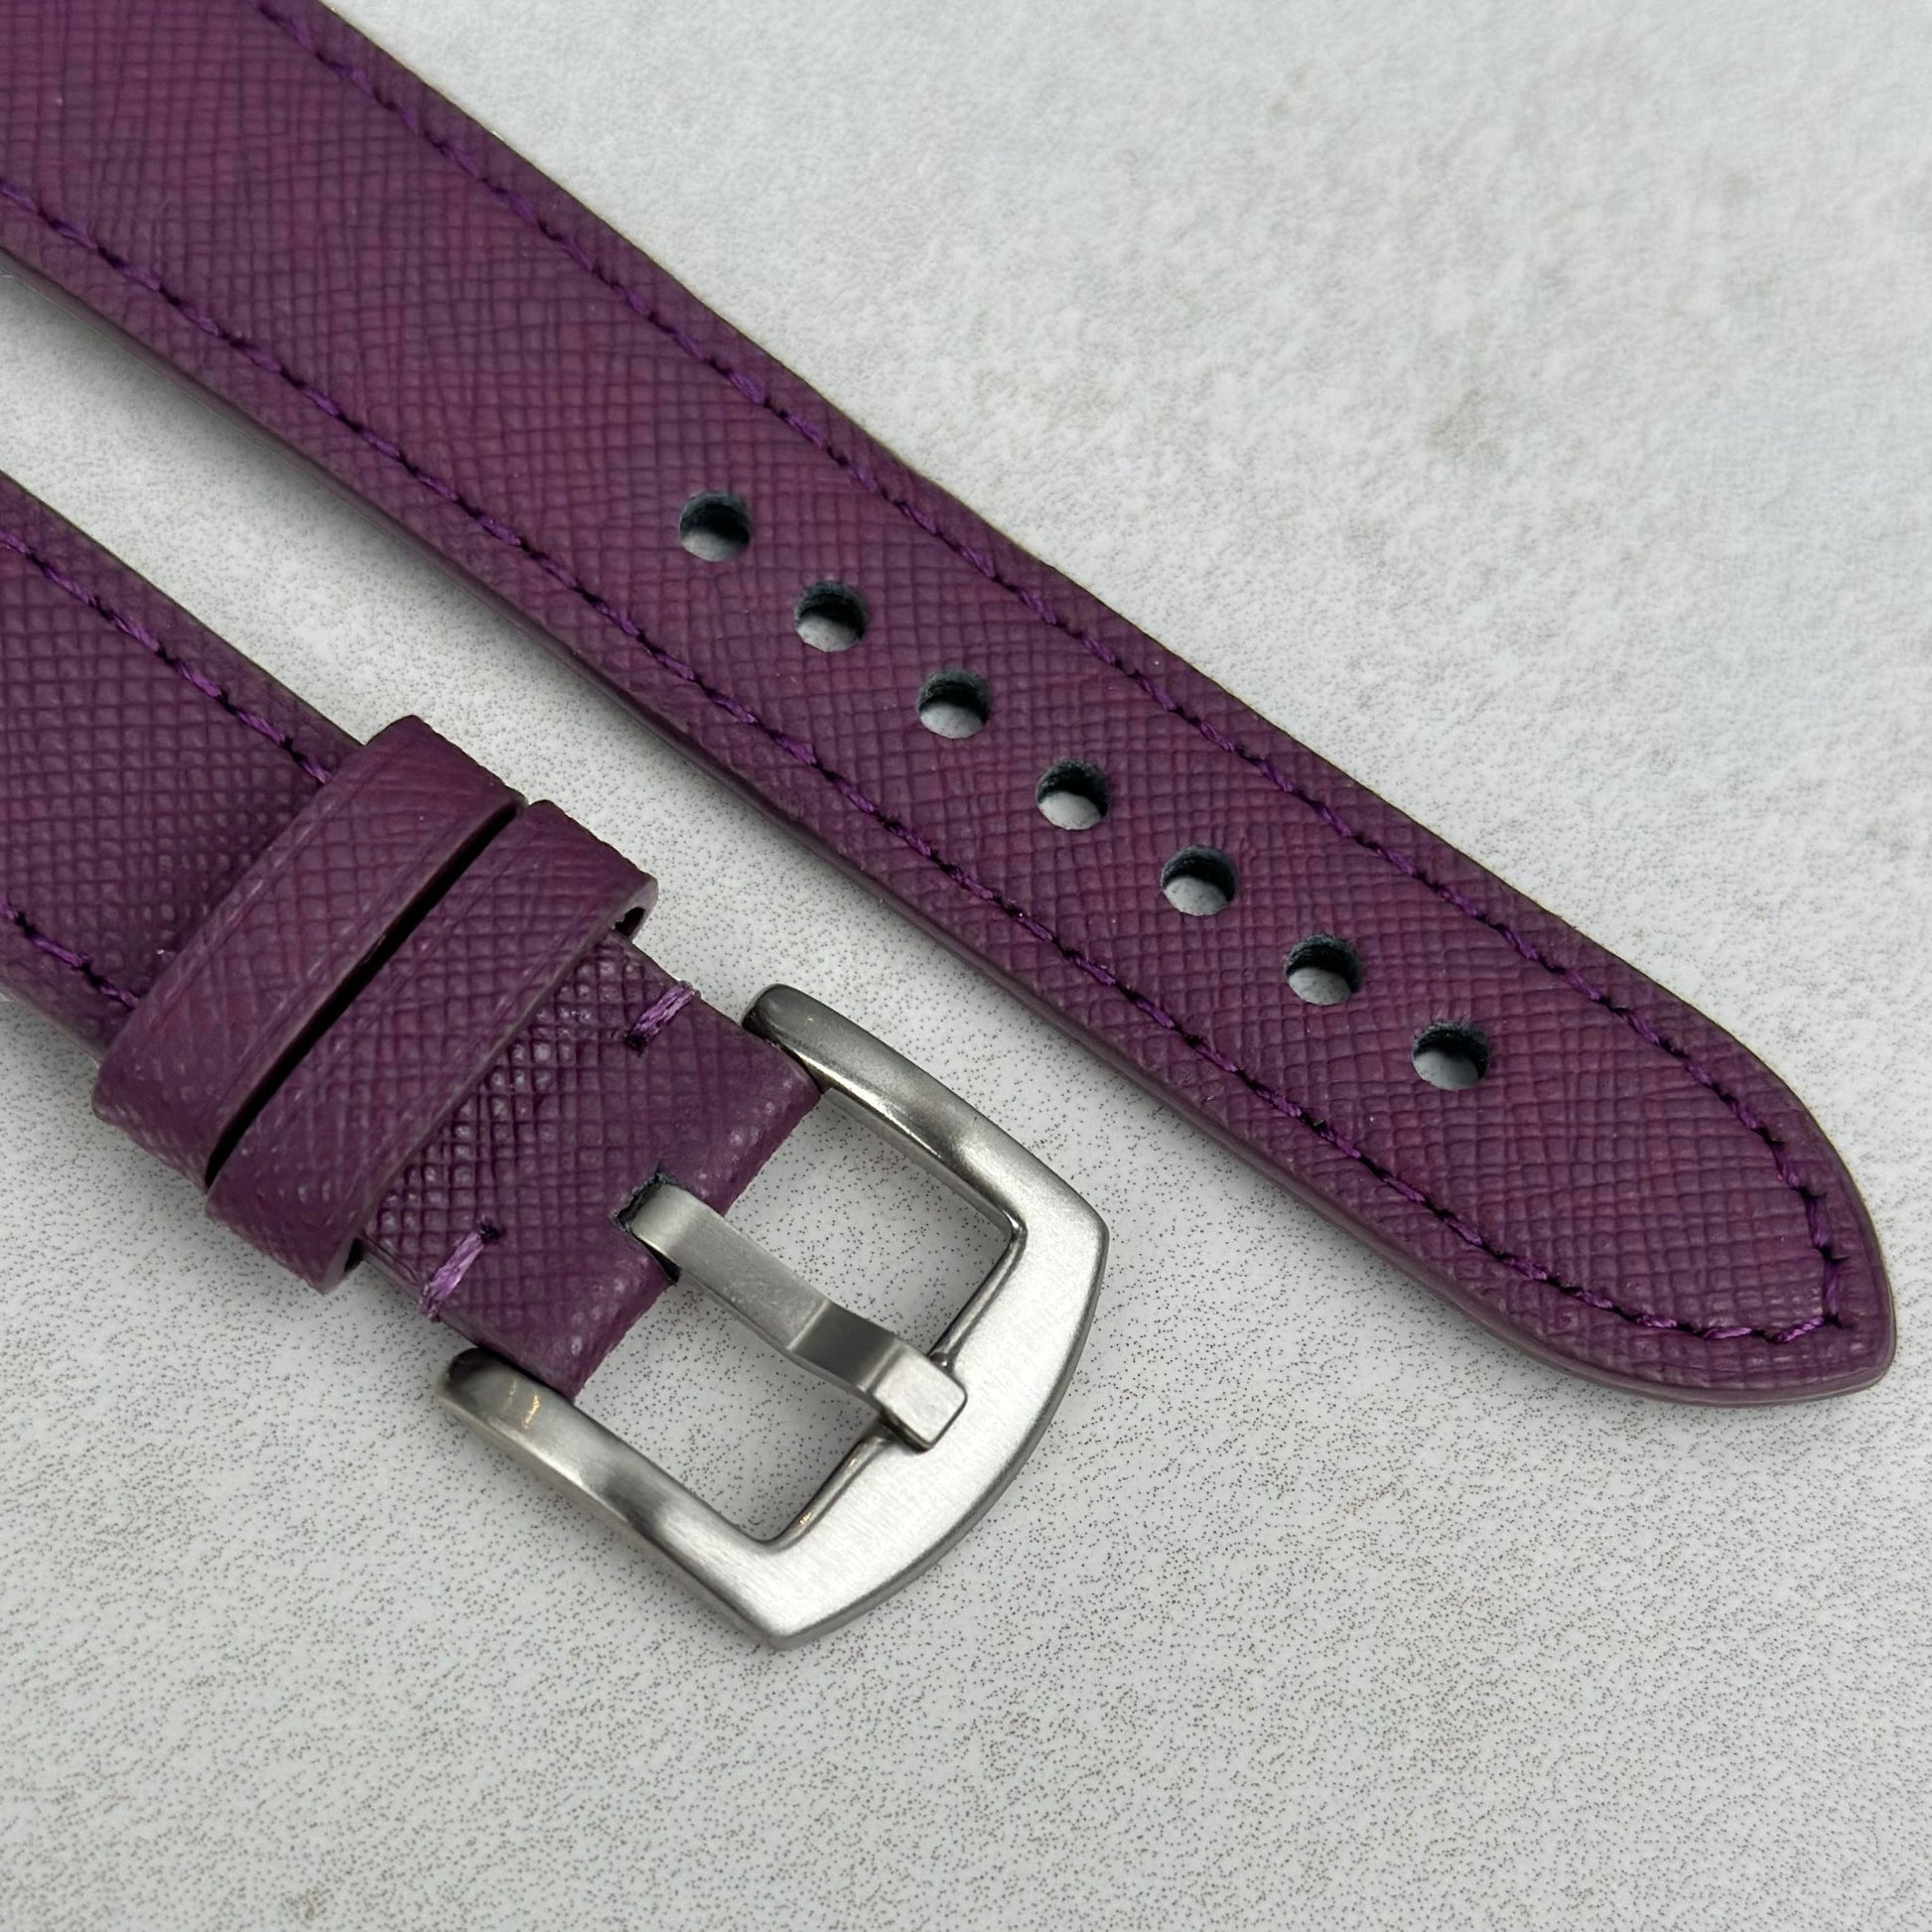 Brushed 316L stainless steel buckle on the Florence Royal Purple Saffiano leather watch strap. Watch And Strap.